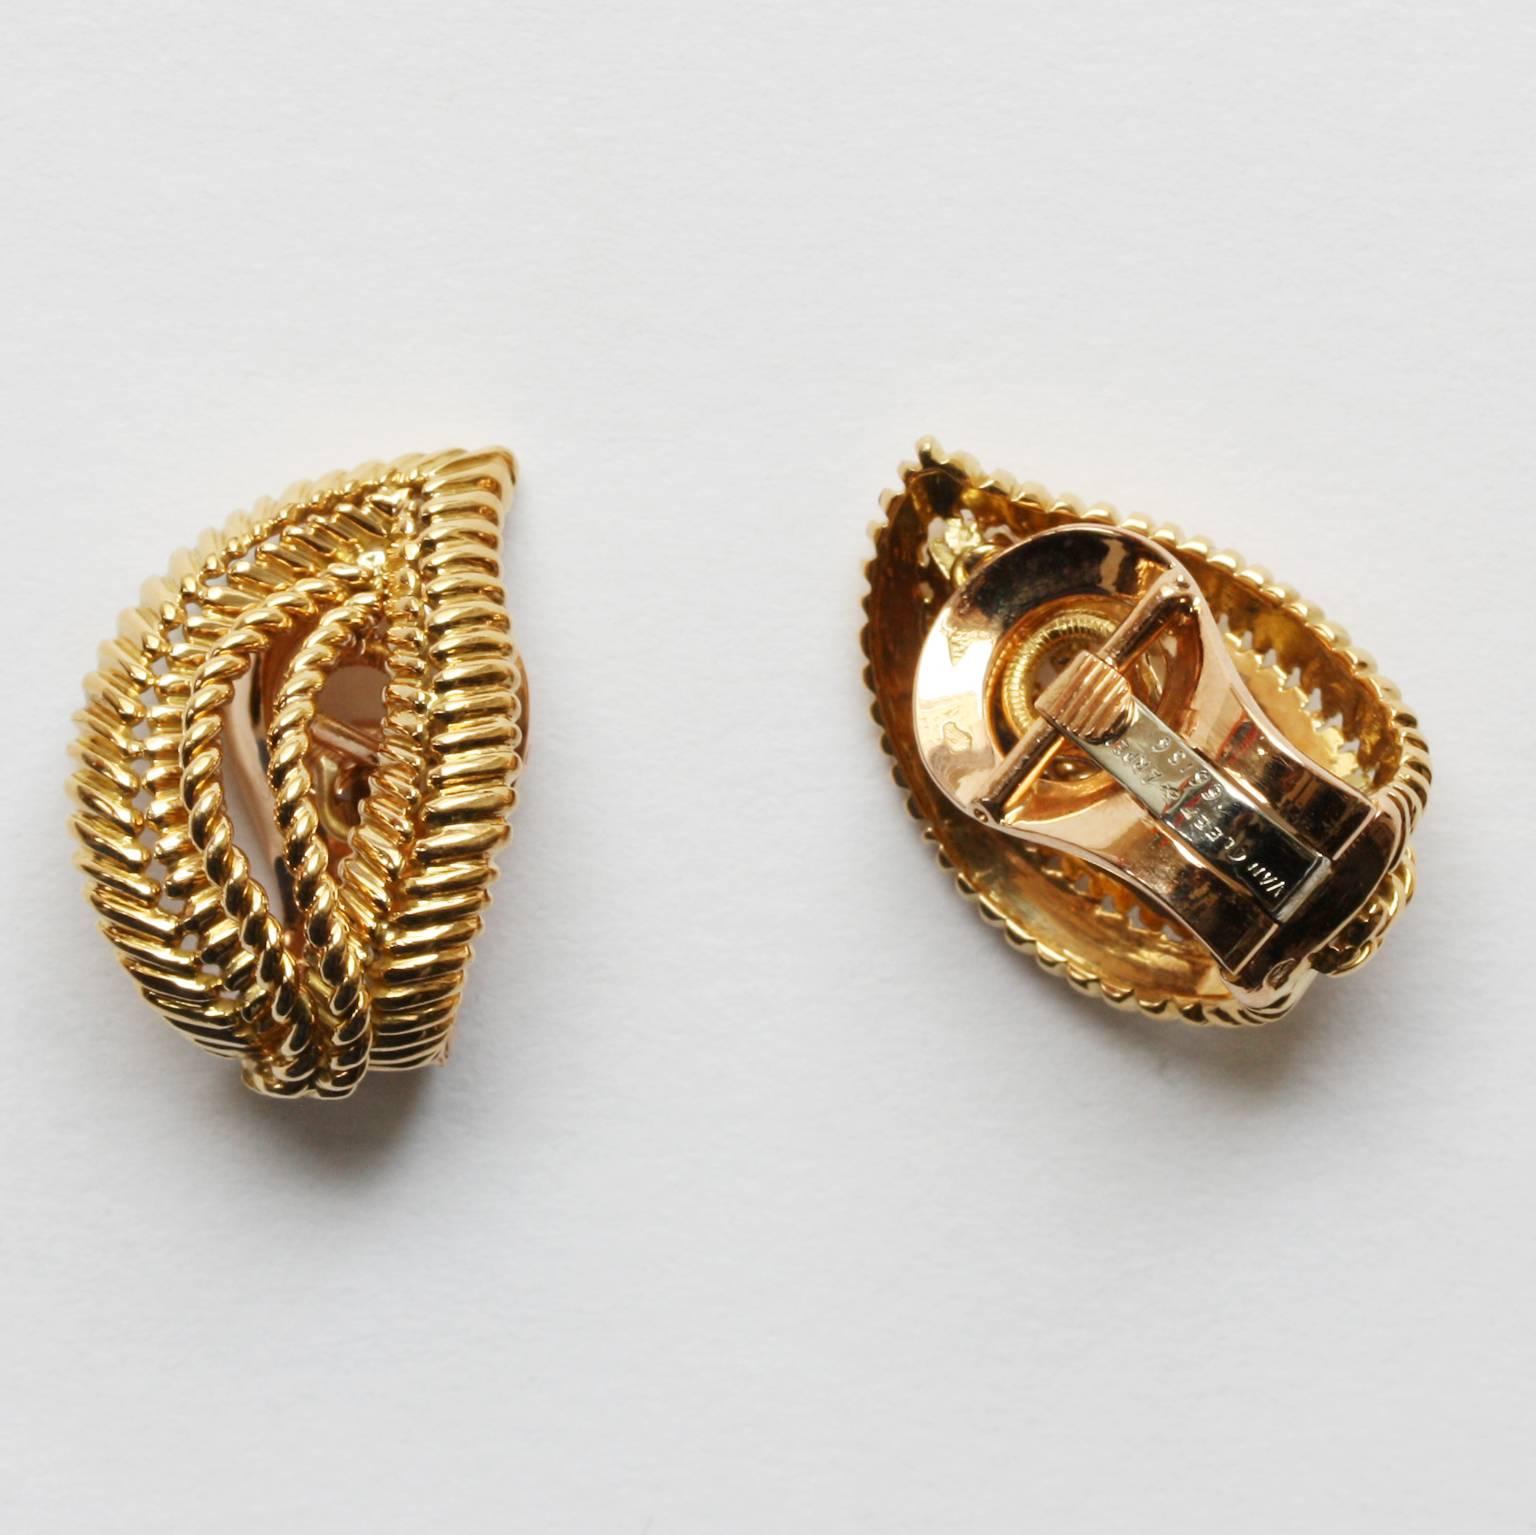 A pair of 18 carat gold ear clips (convertable to dress clips) in the shape of stylized leaves, signed and numbered: Van Cleef & Arpels, 66156, circa 1950, France.

weight: 12.8 grams
dimensions: 2.3 x 1.6 cm.